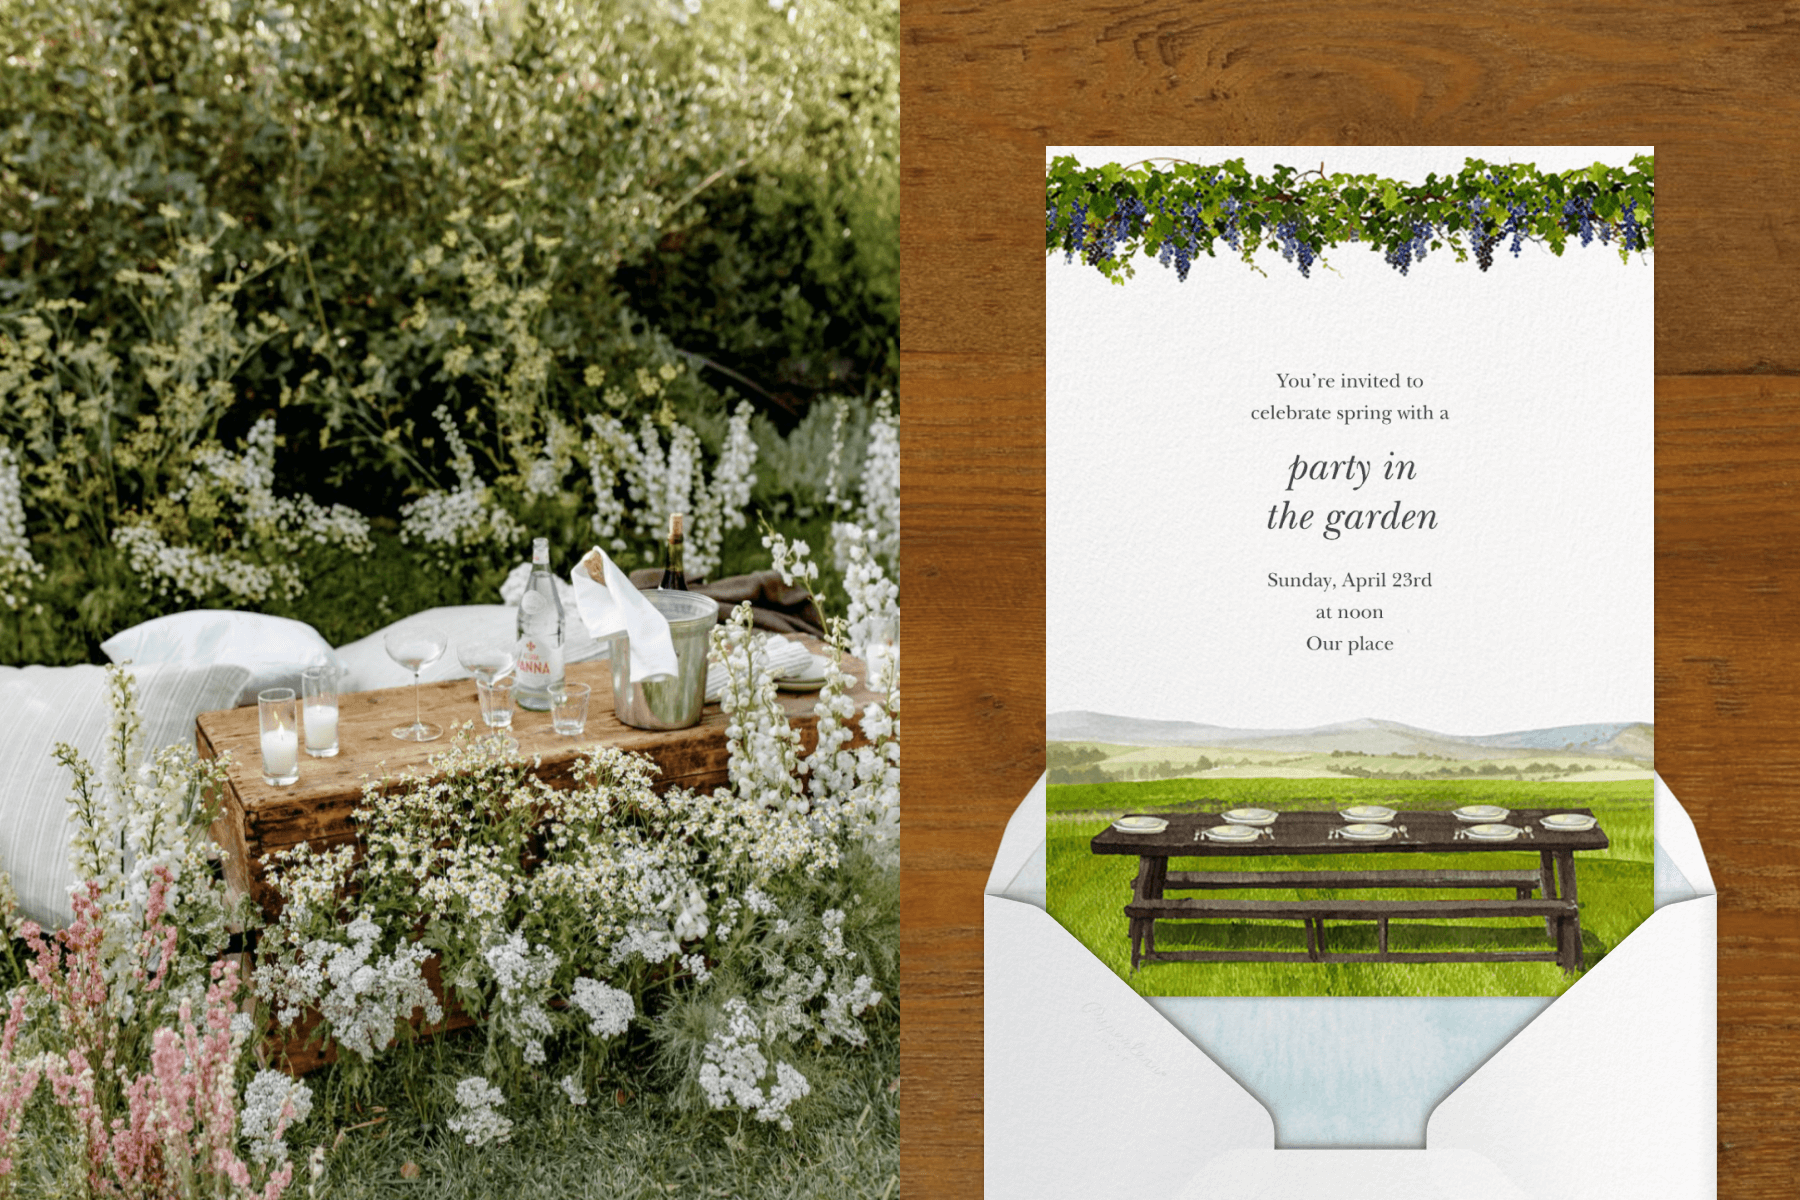 A wooden table with beverages in an overgrown flower meadow; an invitation with a picnic table in a green field.